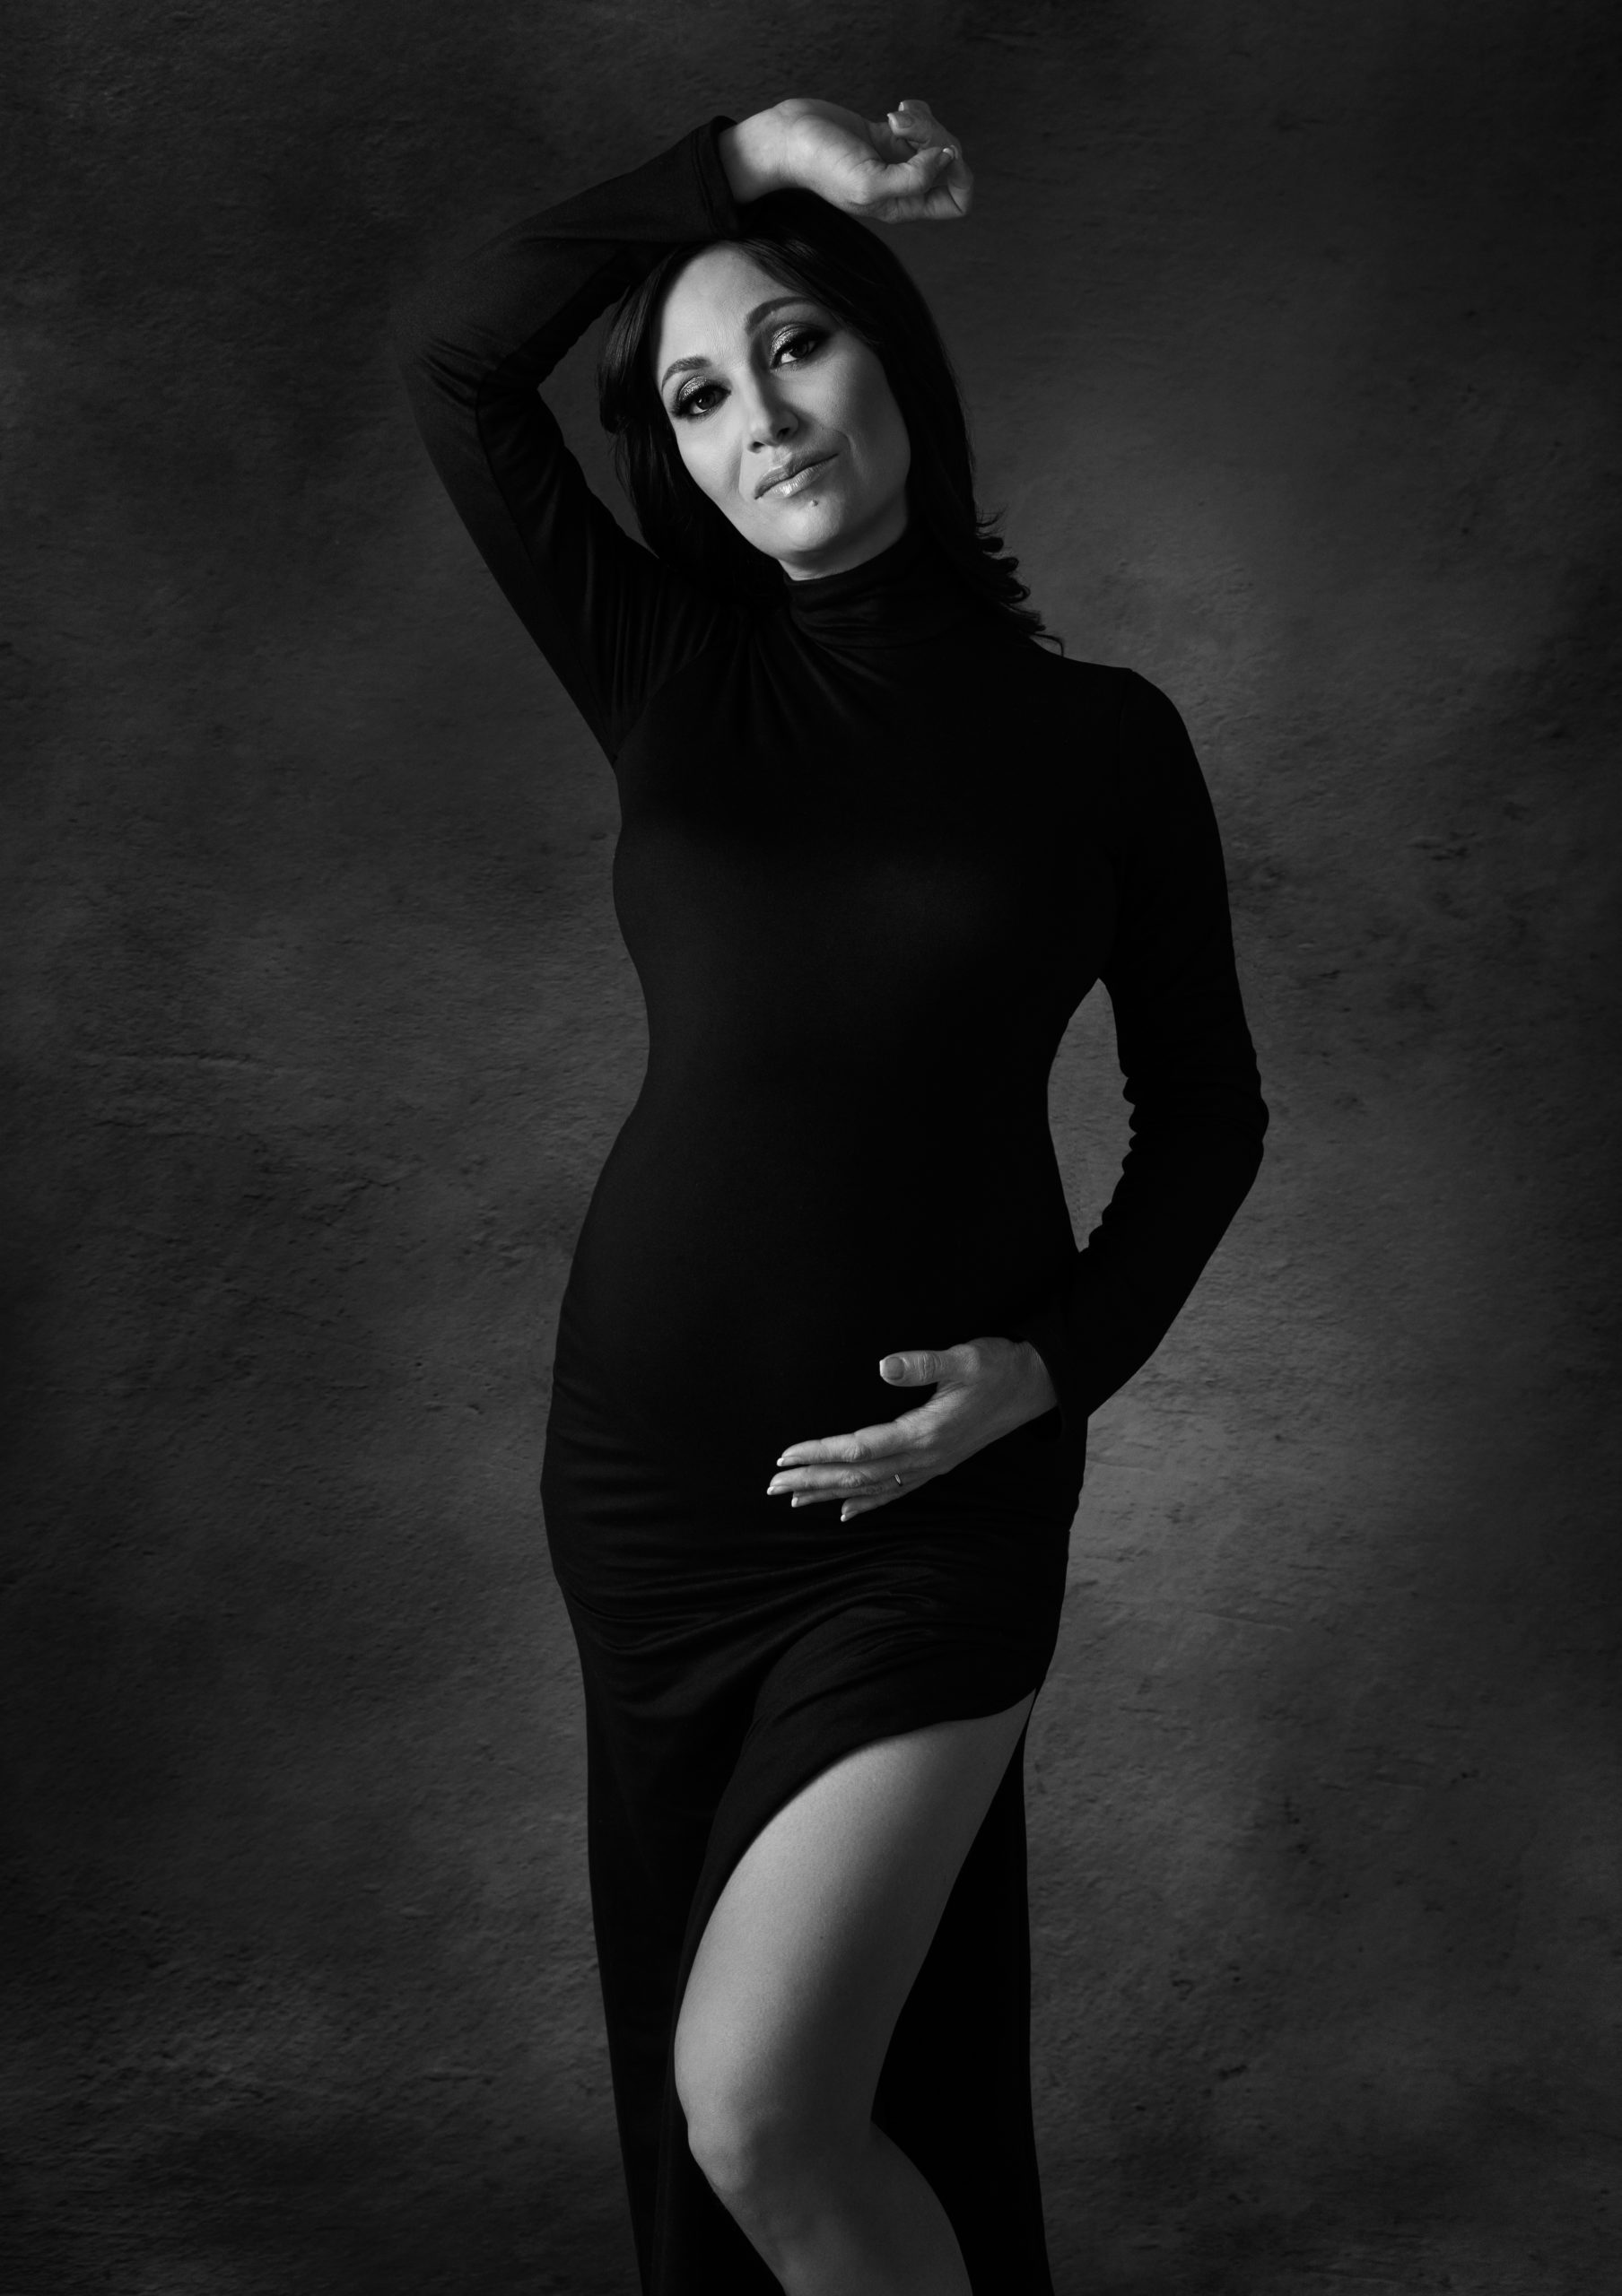 Modern fashion style maternity portraits in San Francisco Bay Area by Andrea Liora Studios